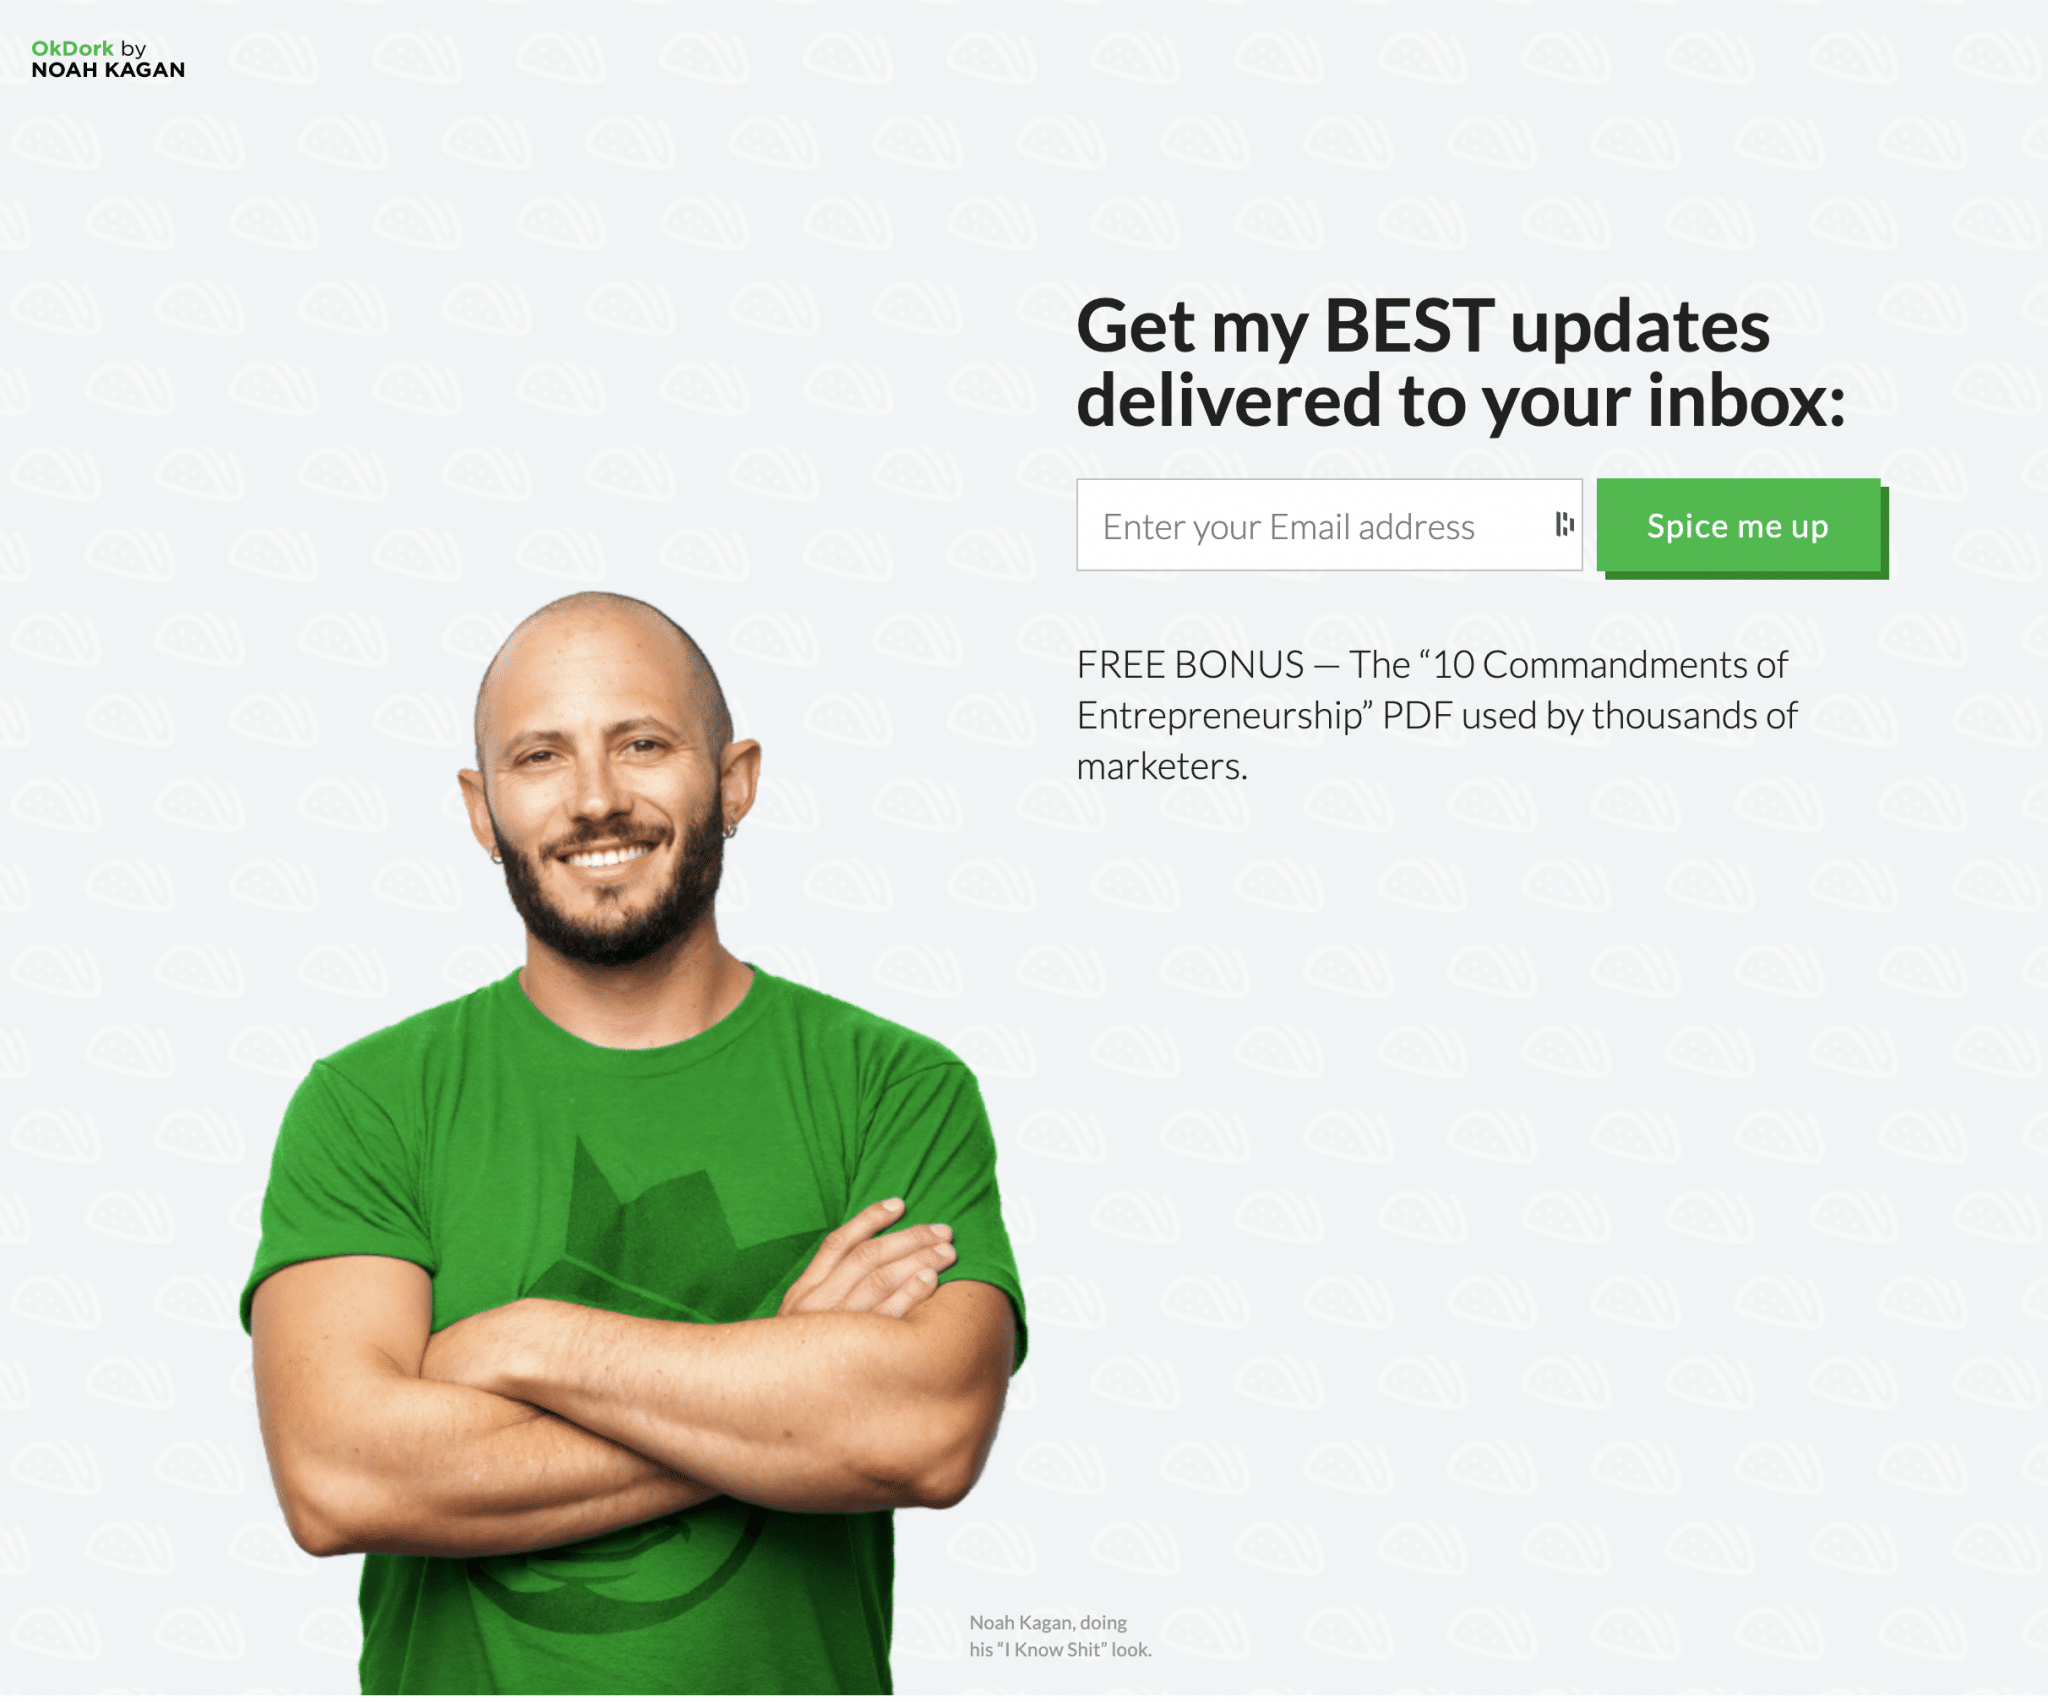 OkDork (by Noah Kagan) landing page to get his best updates delivered to your inbox. 